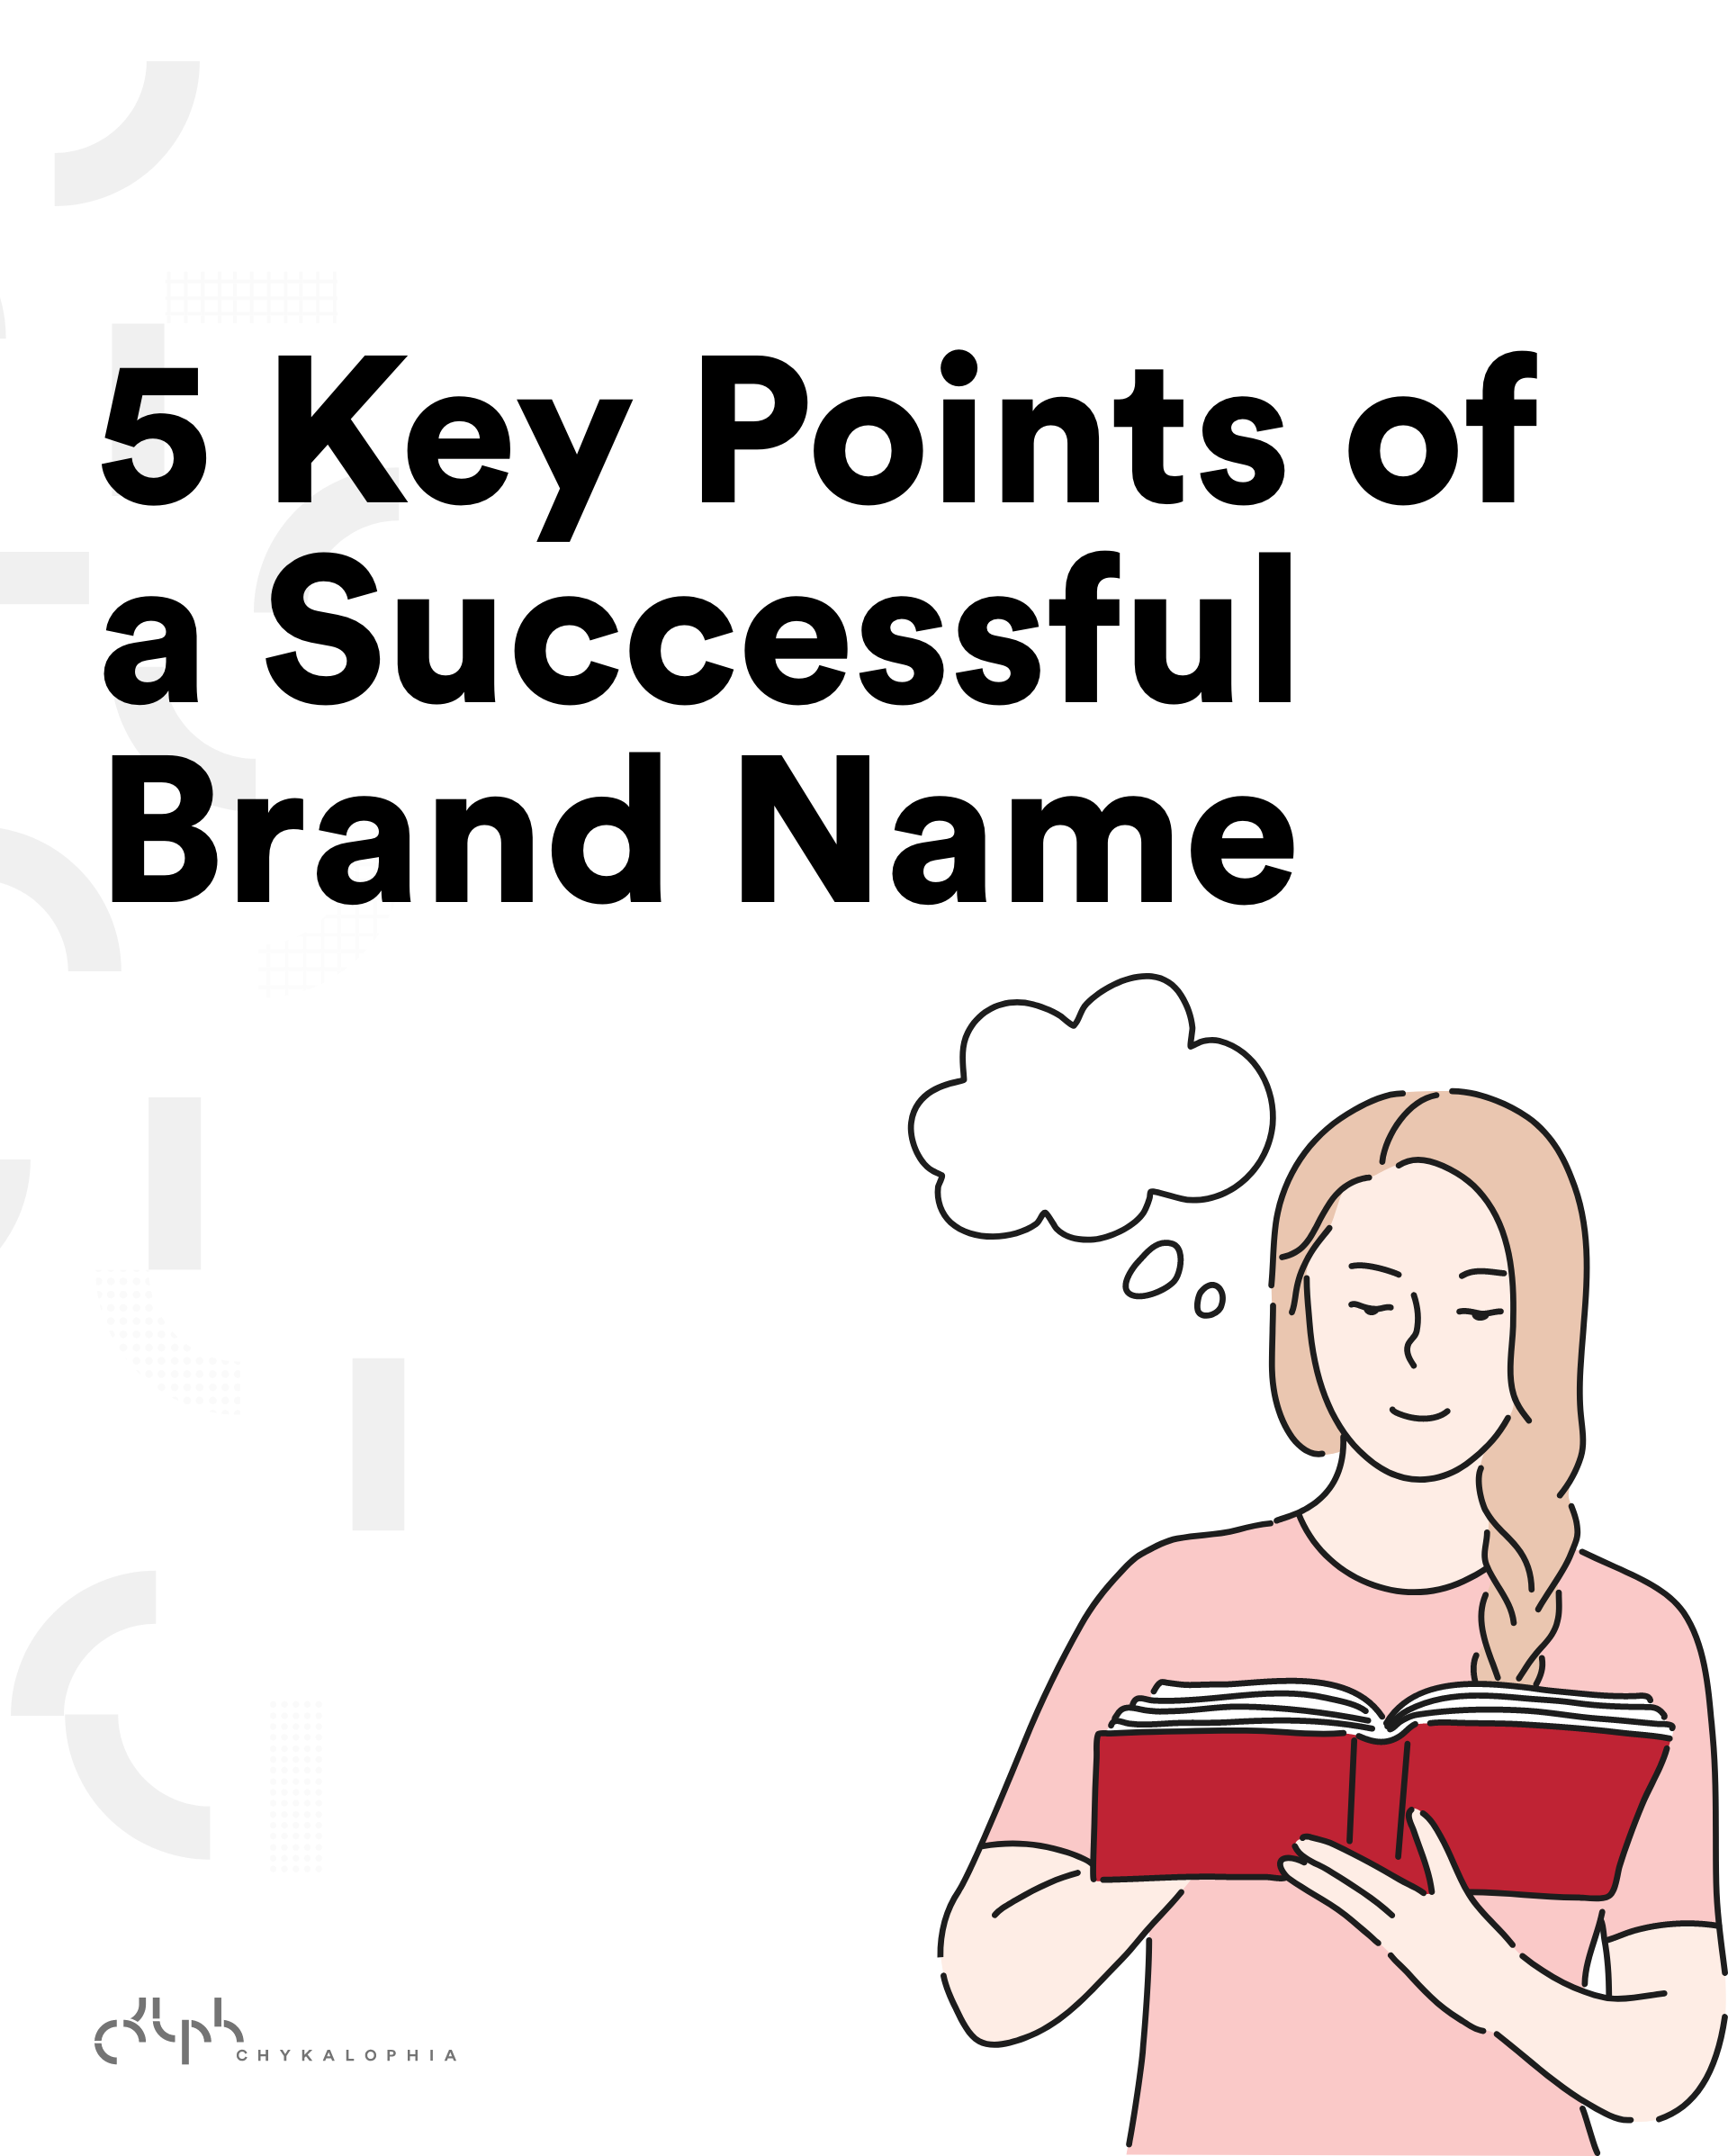 5 Key Points of a Successful Brand Name